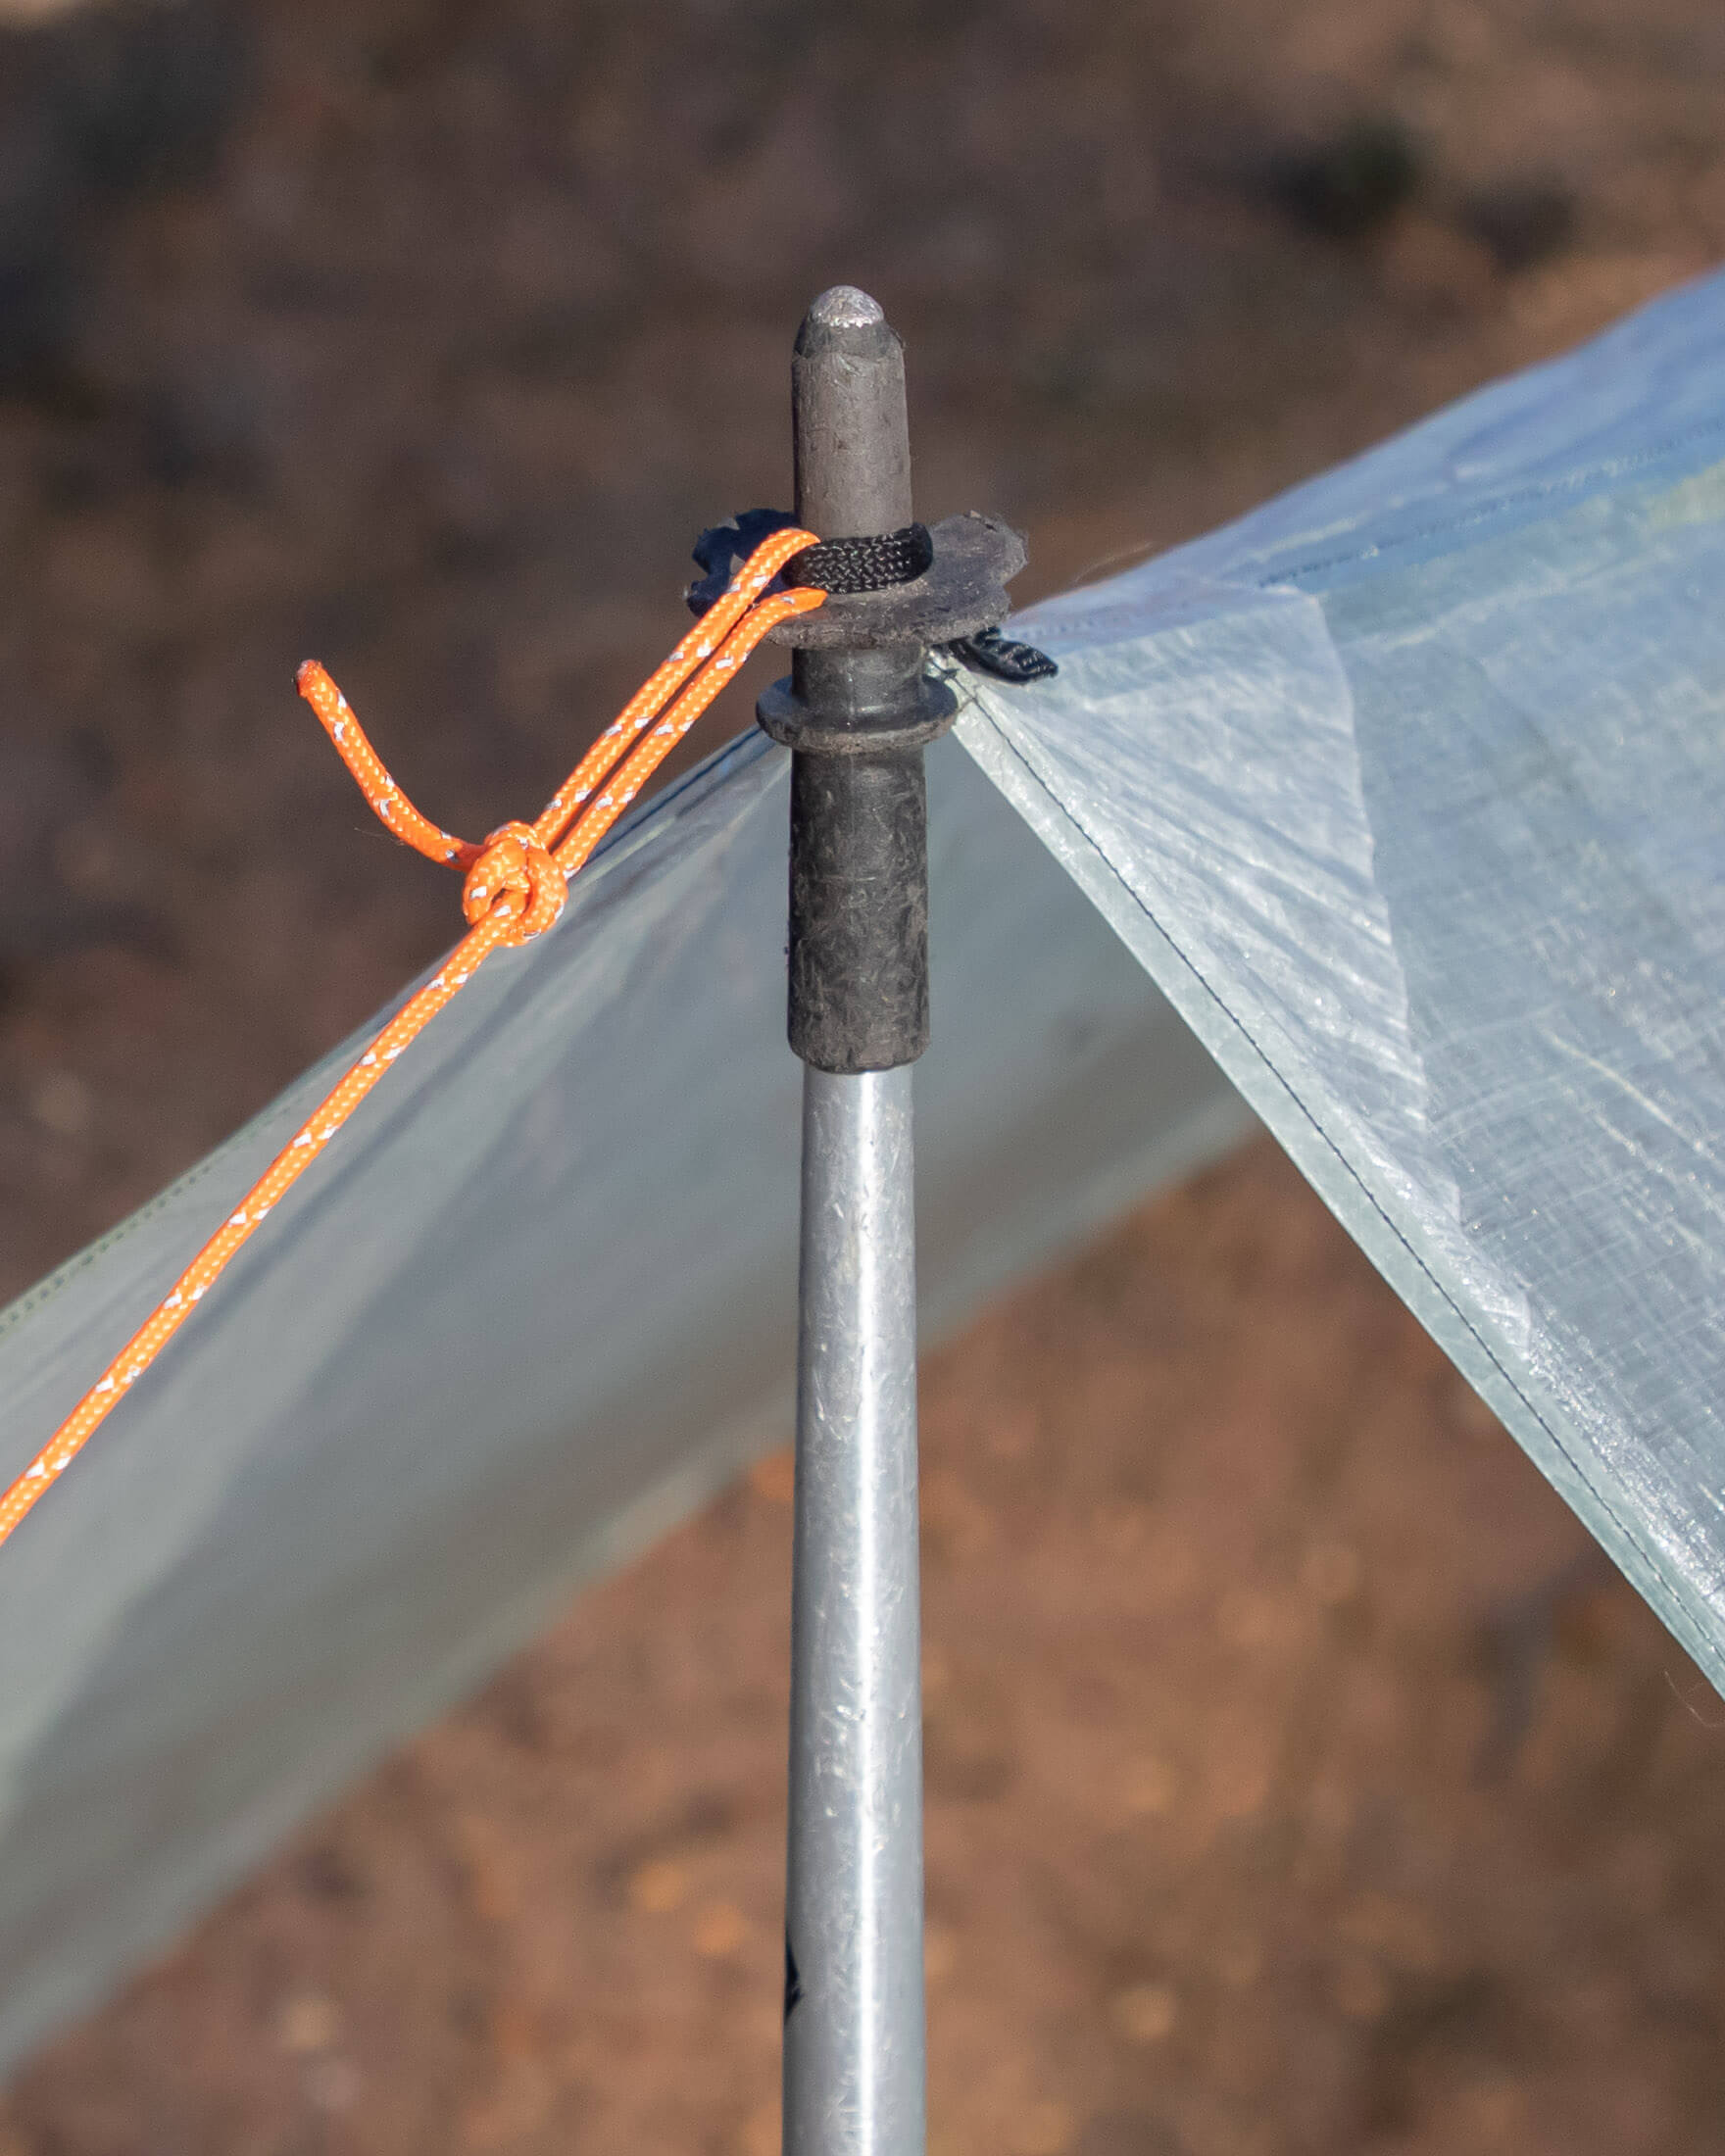 trekking pole used for tarp support